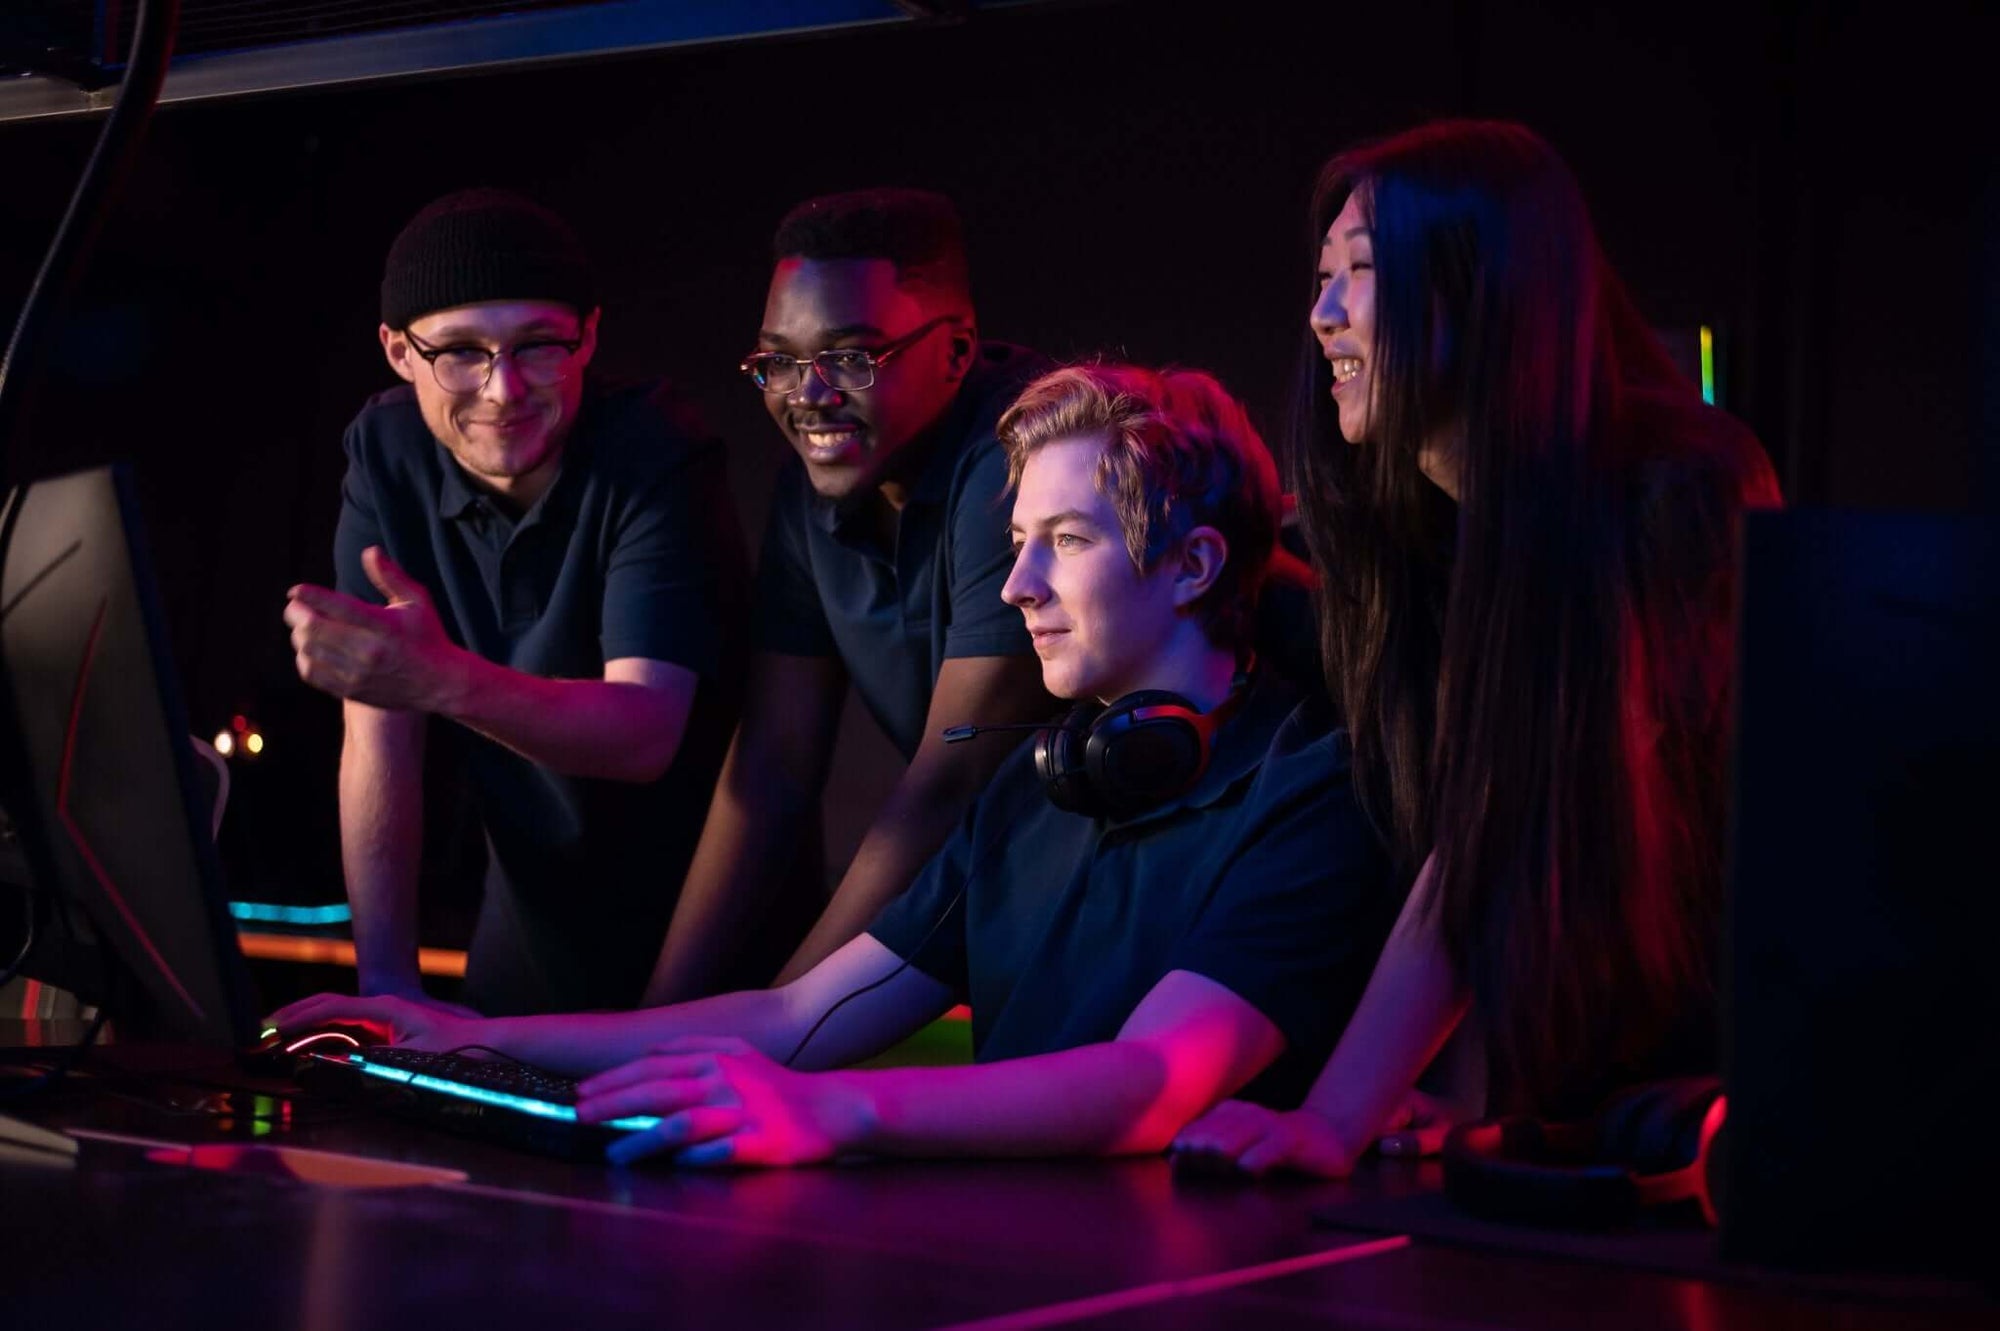 team of gamers working together to win